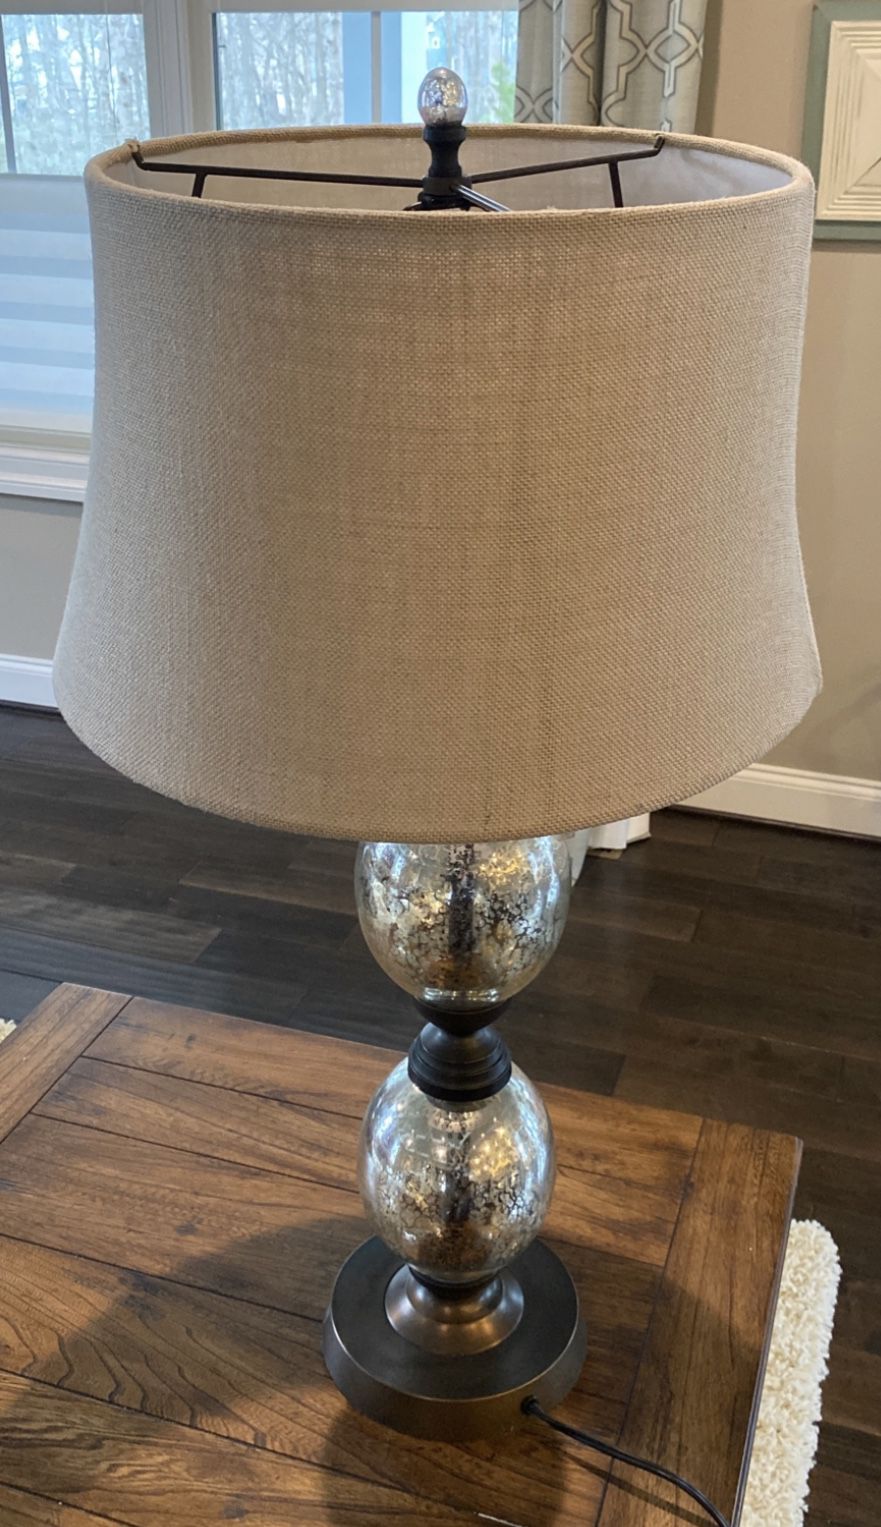 Pottery Barn Stacked Mercury Glass Table Lamp (Set of 2!)